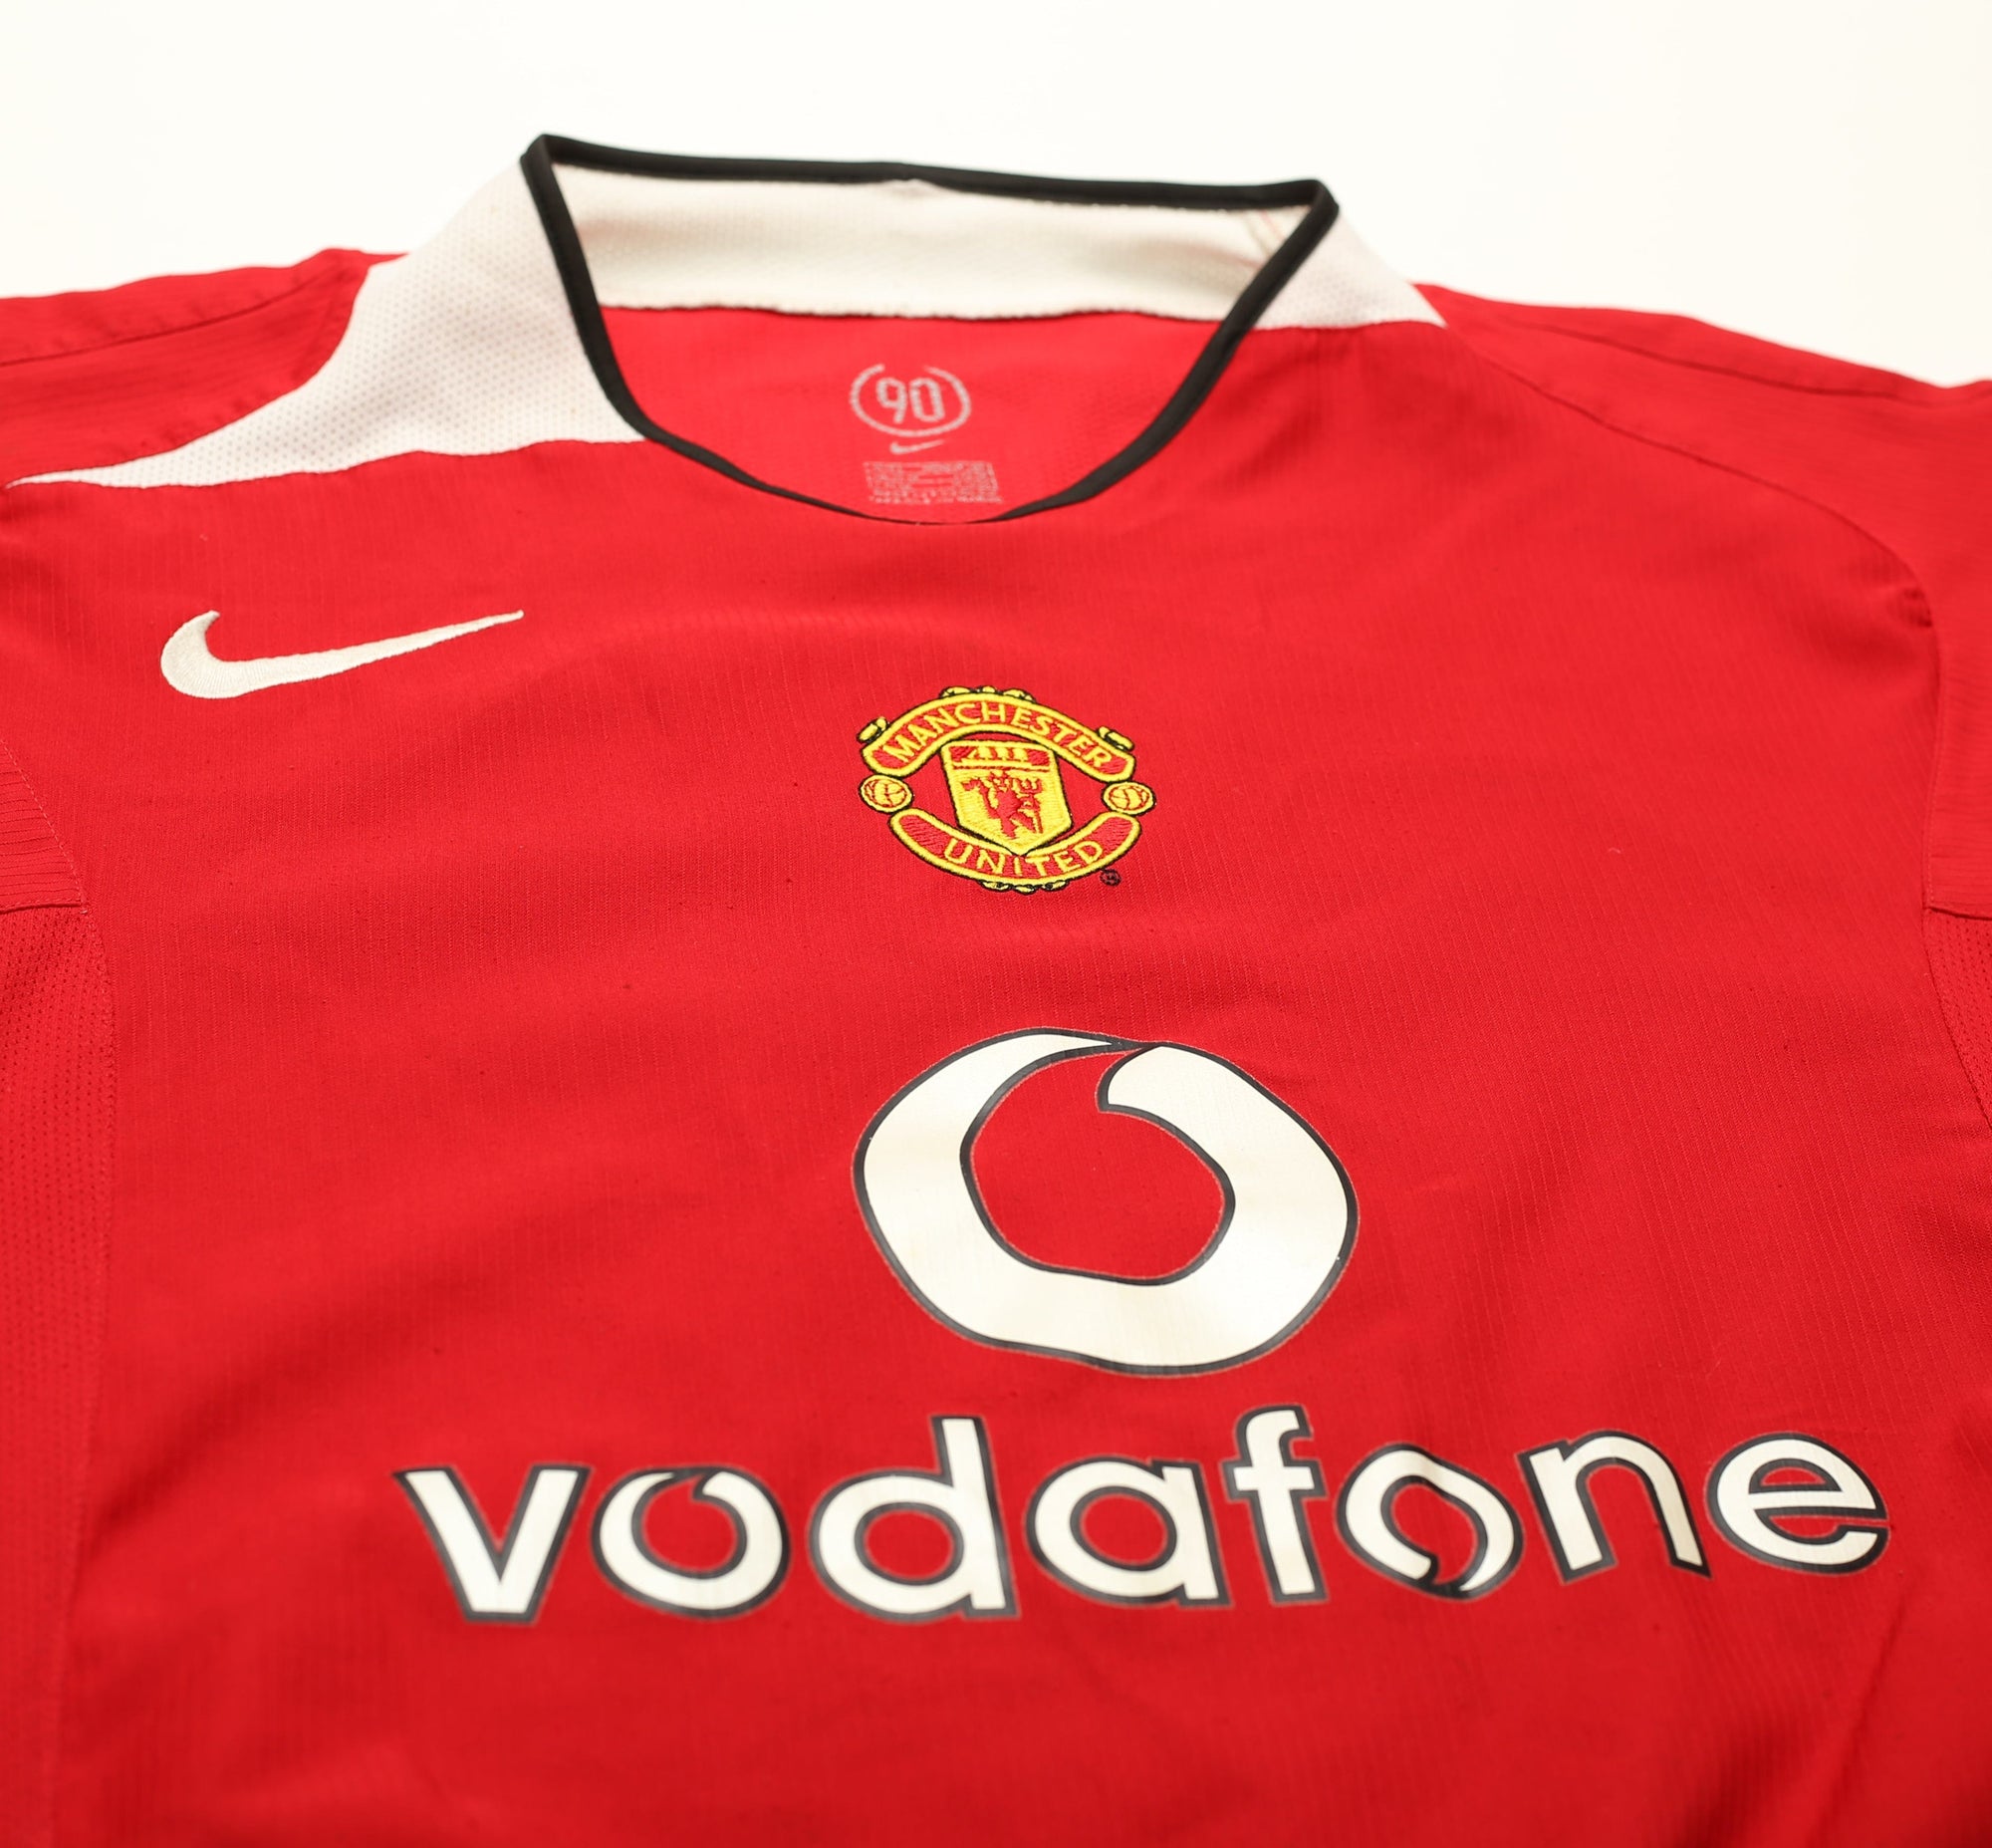 2004/06 ROONEY #8 Manchester United Vintage Nike UCL Home Football Shirt (L)